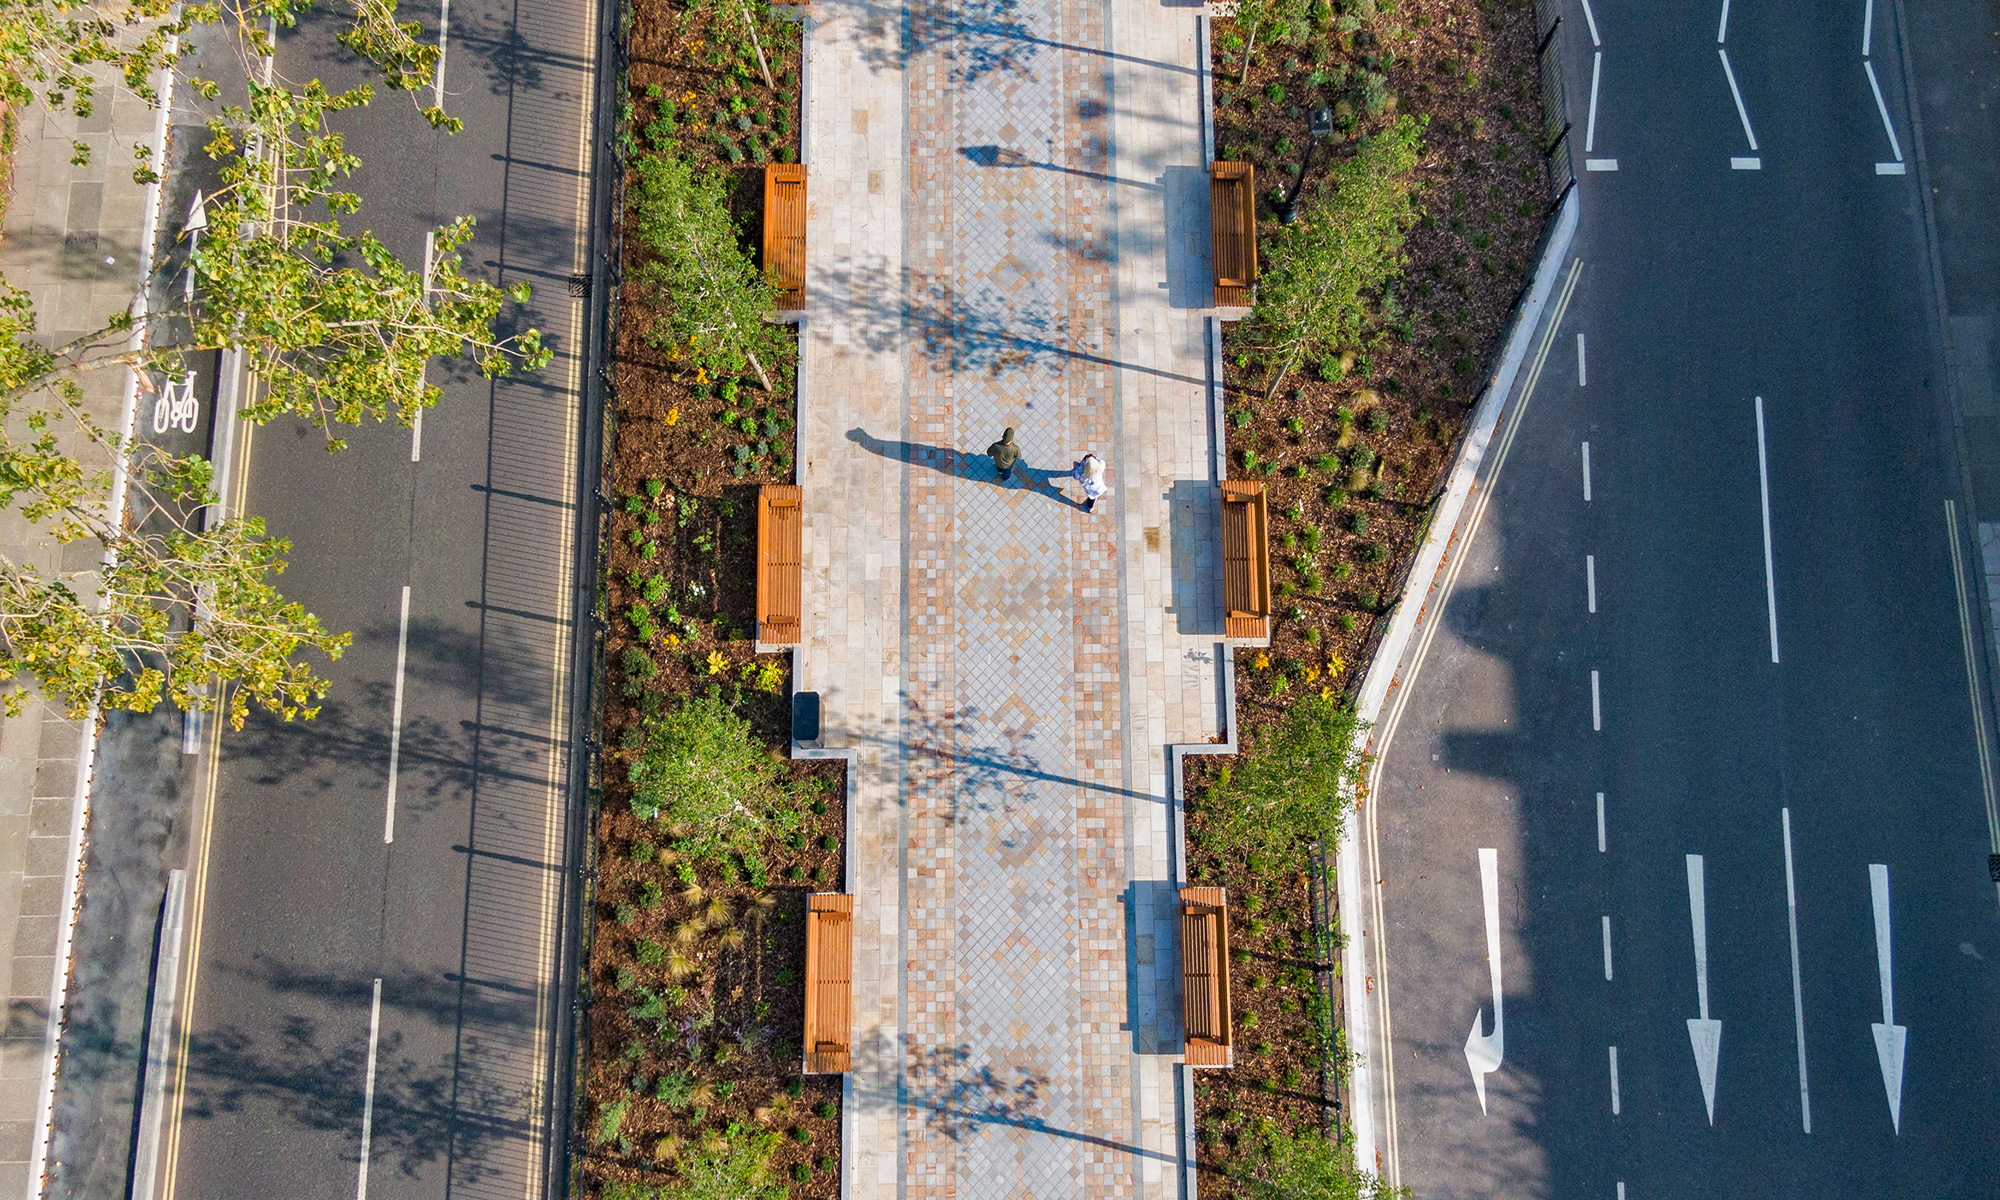 Aerial shot of the walking space at Princes Boulevard in Manchester